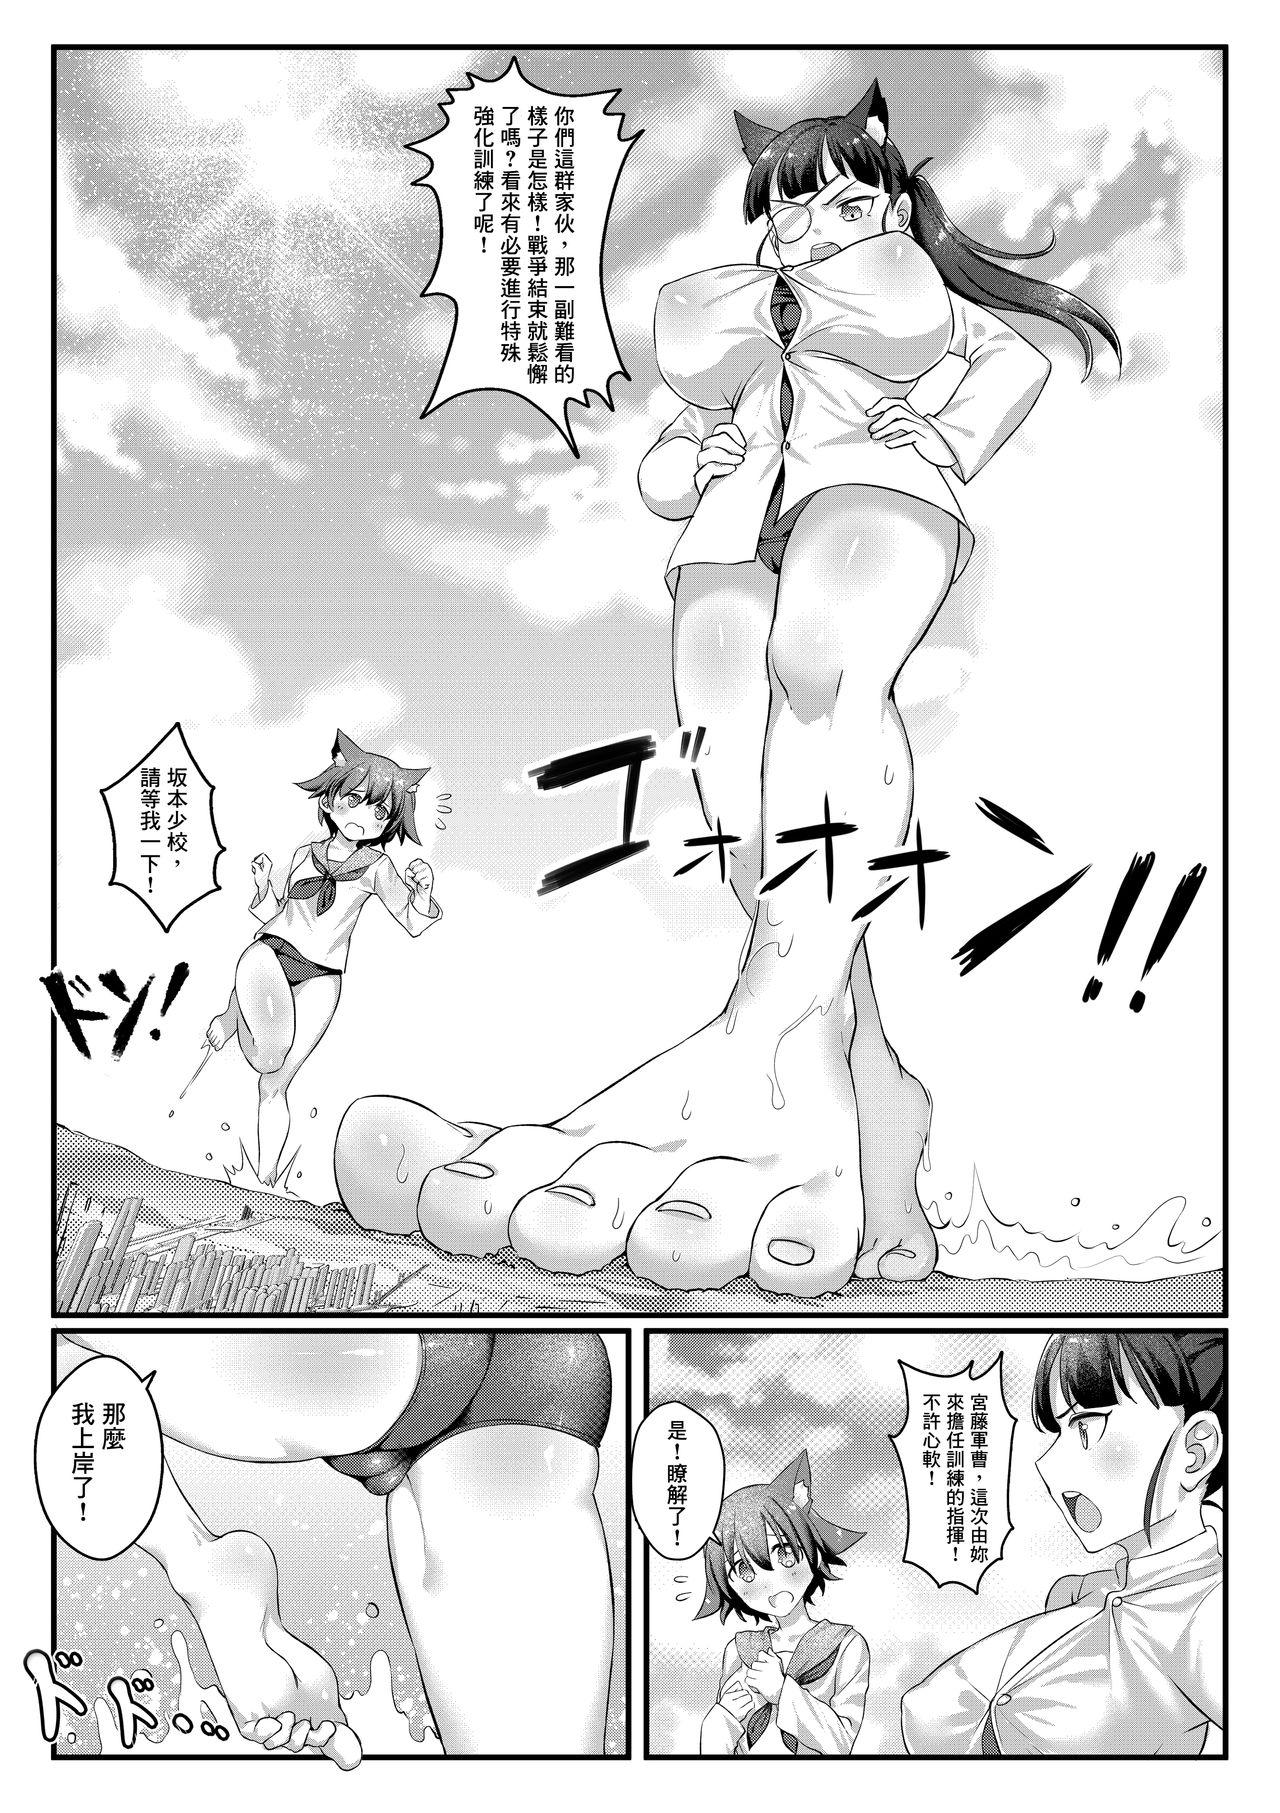 Longhair Air Strike!!! | 防空警報!!! - Strike witches Fake Tits - Page 4